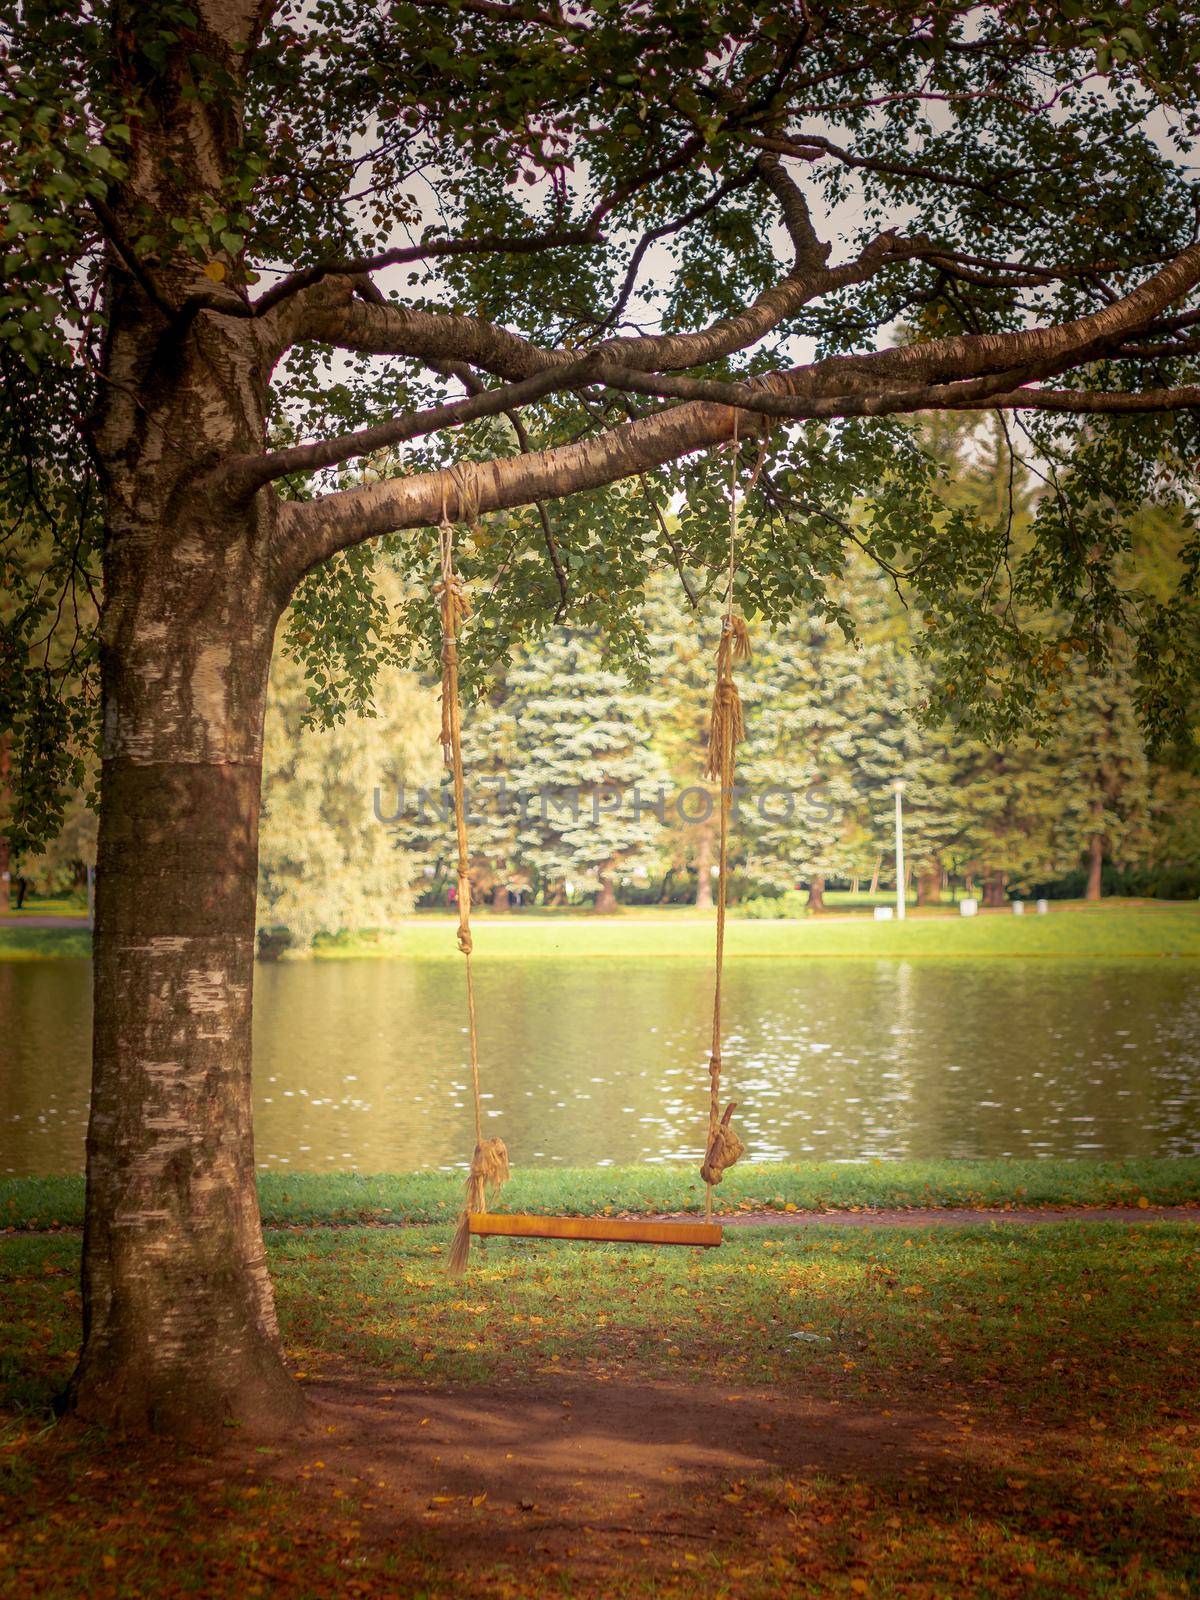 homemade swing from a Board and rope on a tree in a Park or garden, nobody, empty space, autumn background.